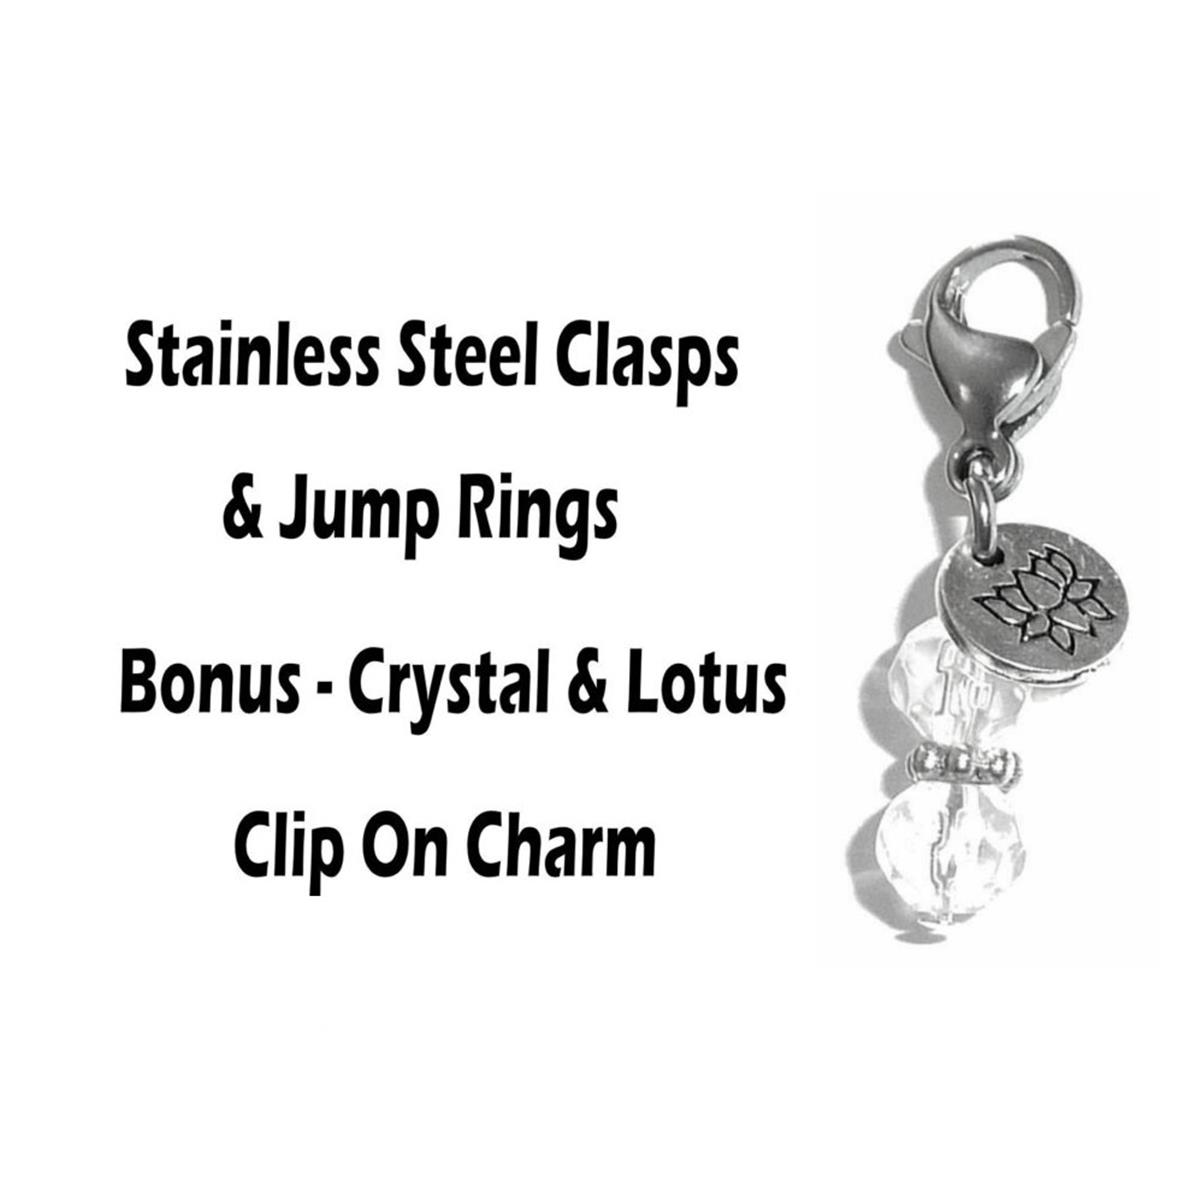 Think Celestial Clip On Charms - Whimsical Charms Clip On Anywhere